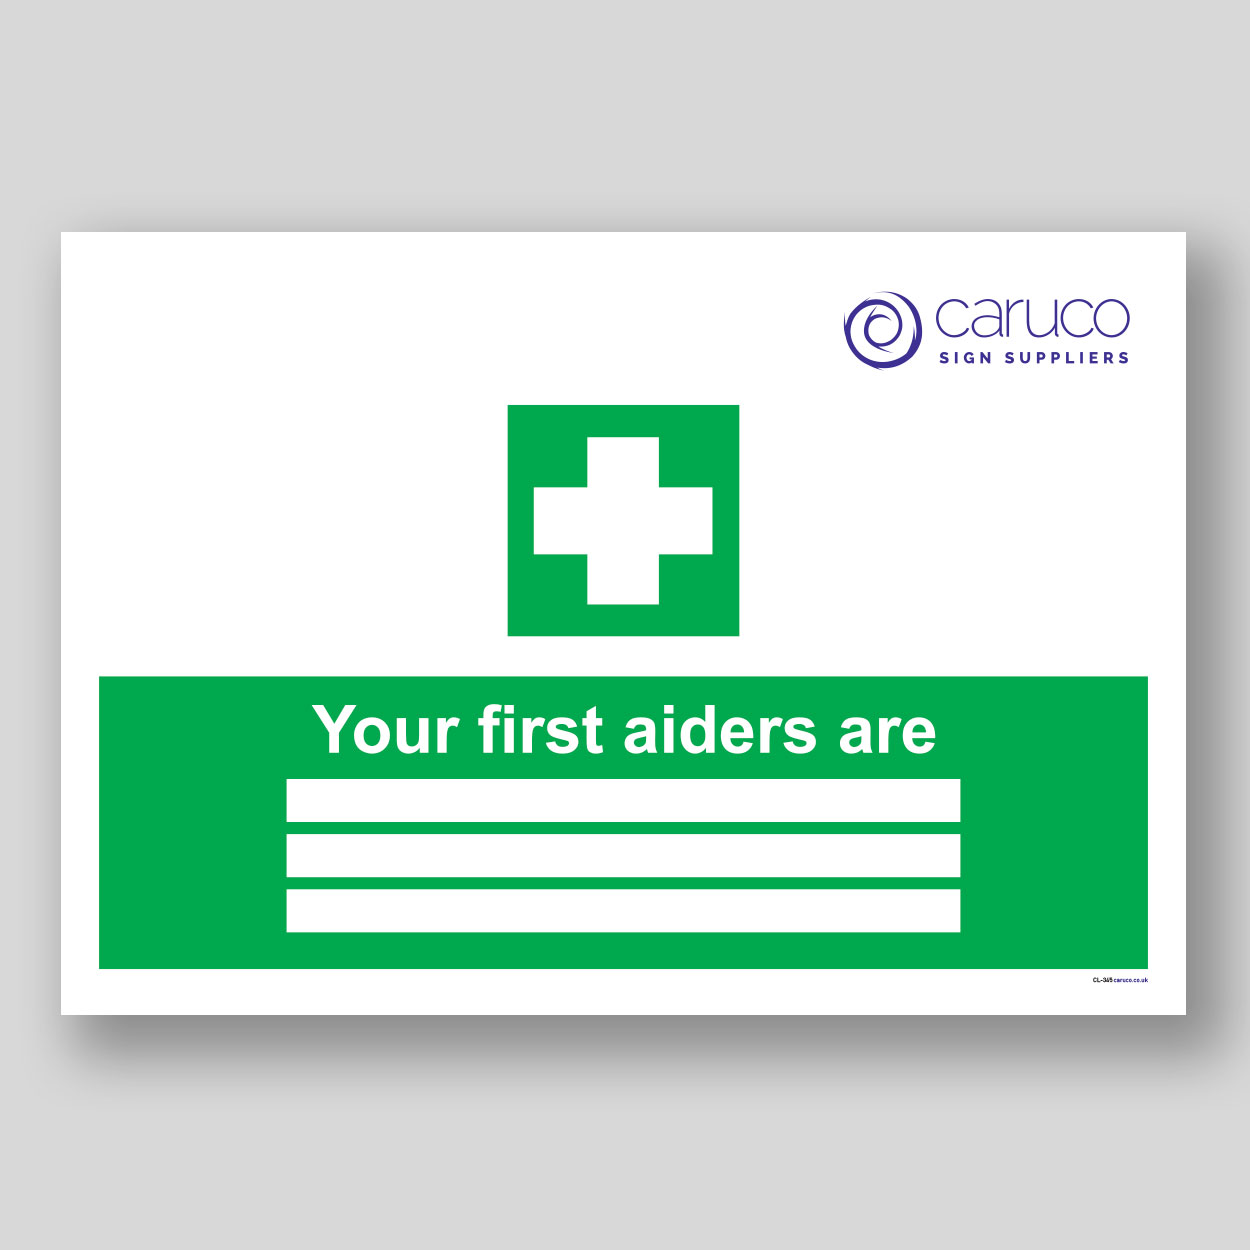 CL-345 Your first aiders are